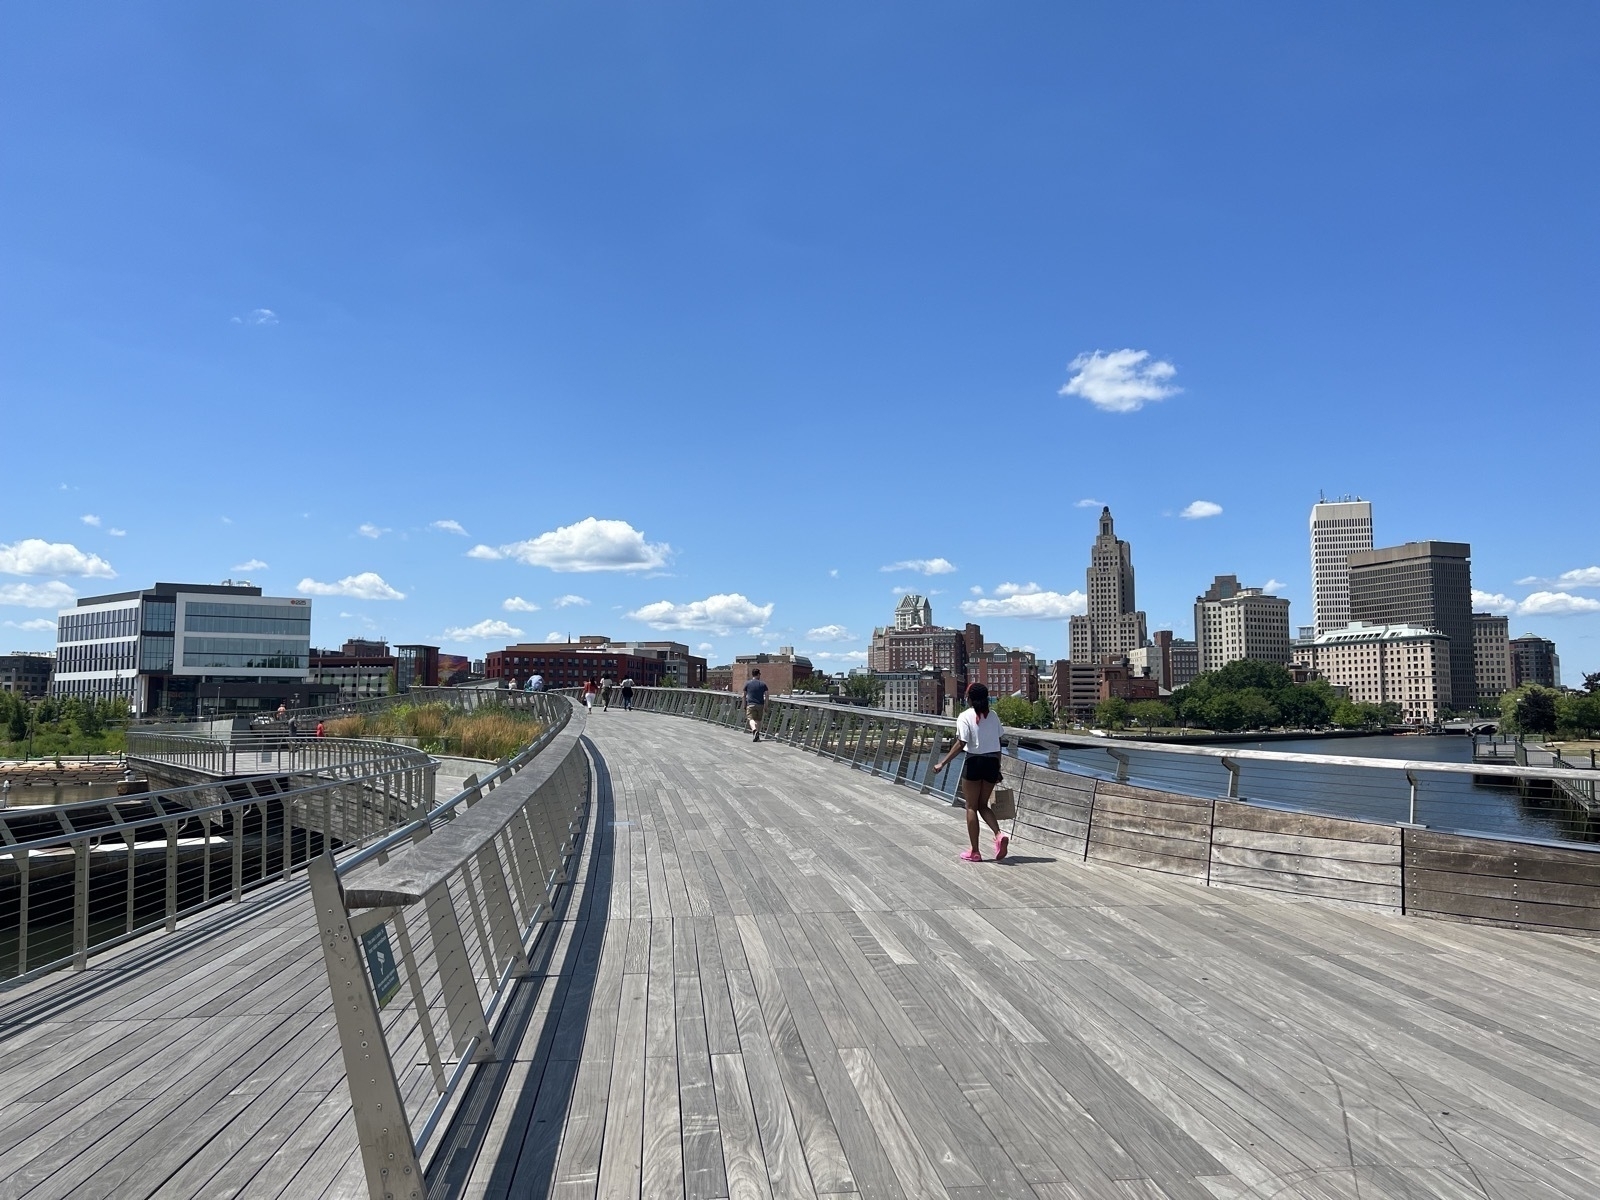 A light gray, wooden, pedestrian bridge with steel railings over the water in Providence RI. The city skyline and park are in the background